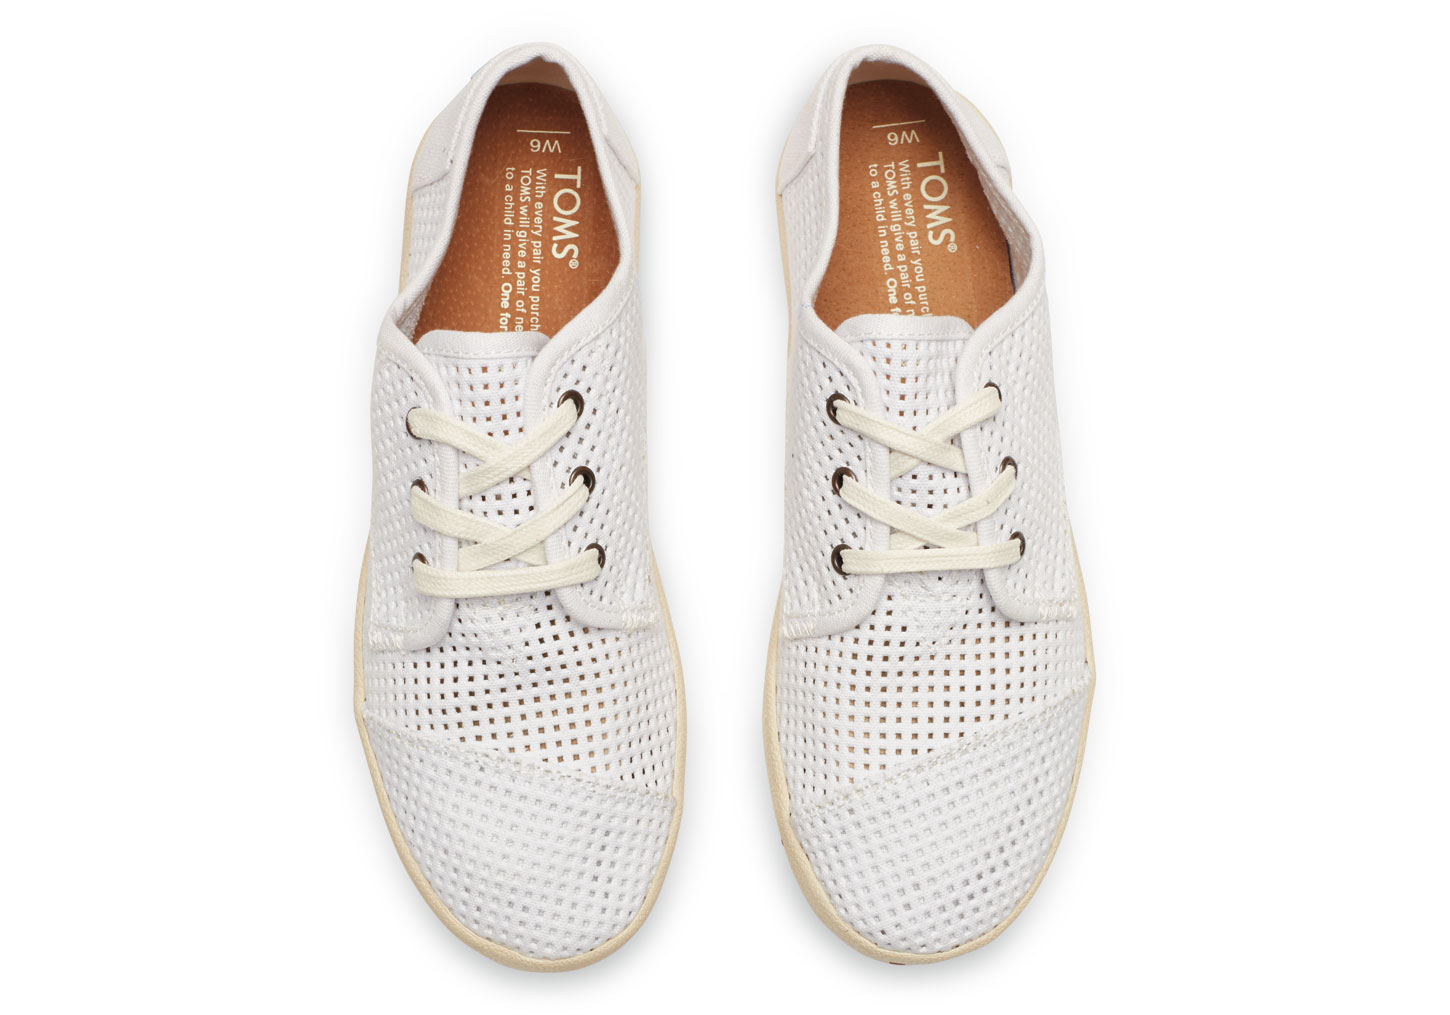 Lyst - Toms White Canvas Perforated Women's Paseos in White